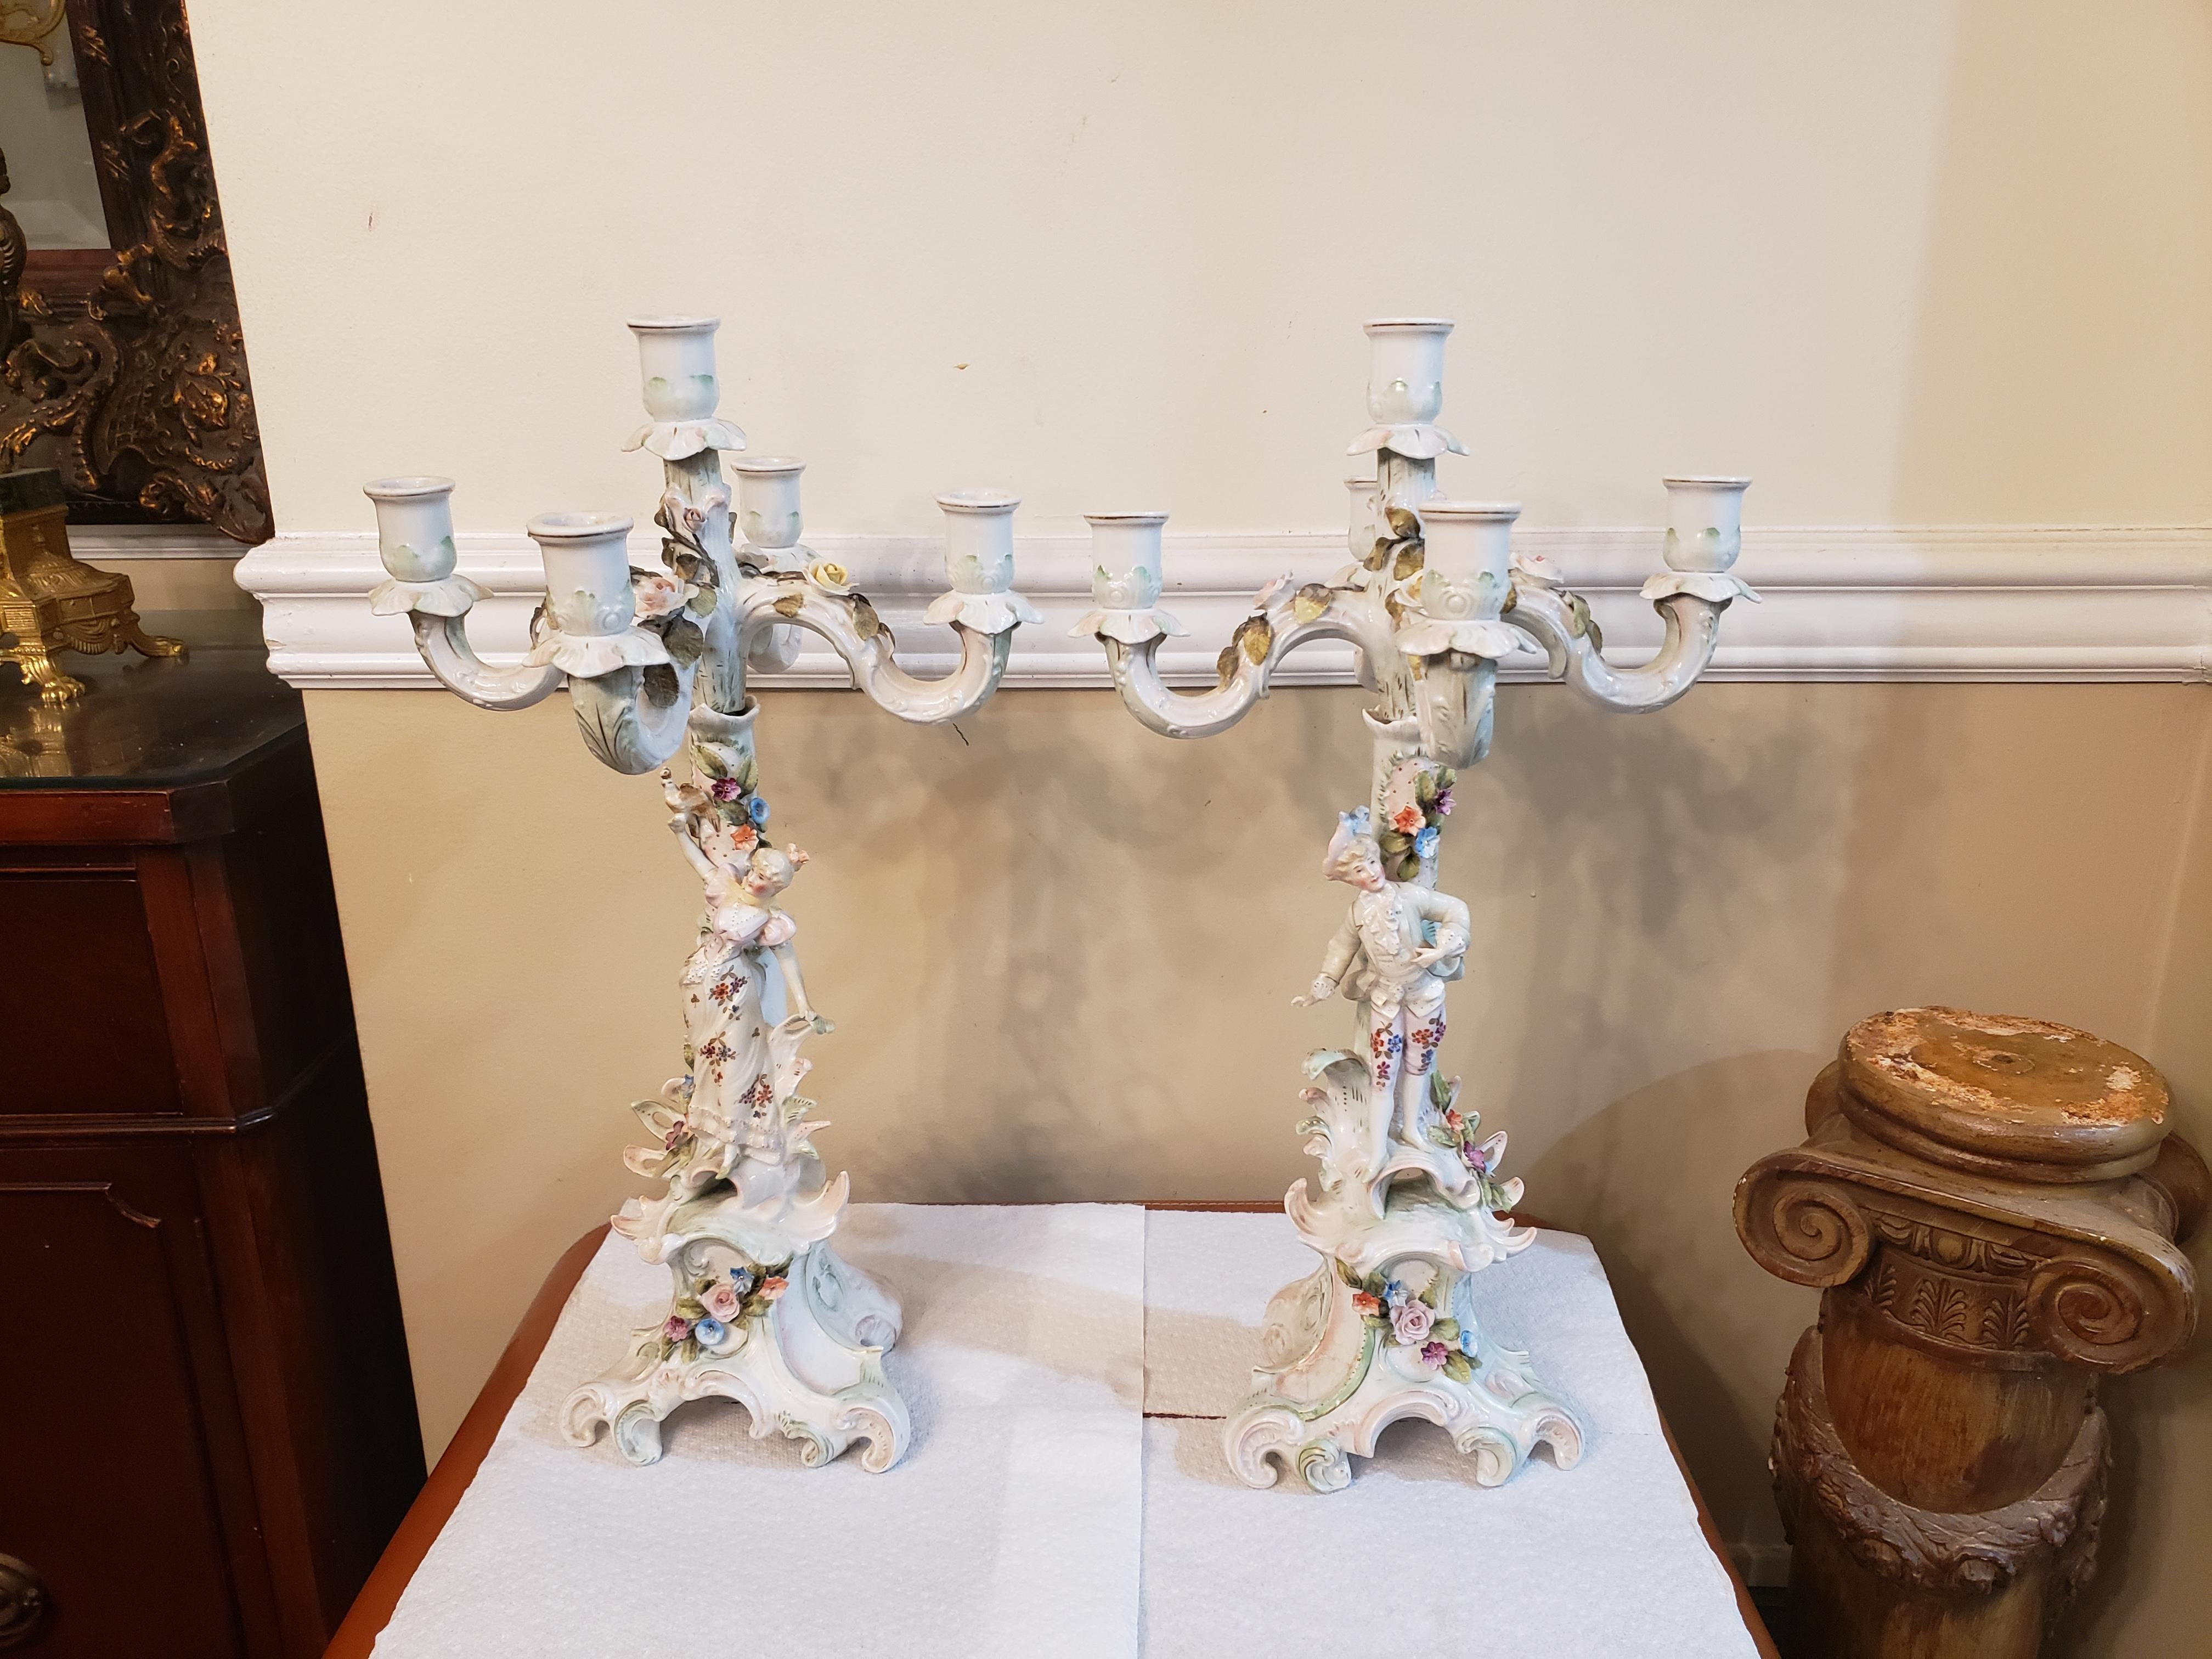 Product details

A good quality pair of early 20th century Meissen Porcelain five branch candelabra, each having wonderful floral, Roses encrusted decoration, with figures of a woman on one and a man on the other. Measure 10